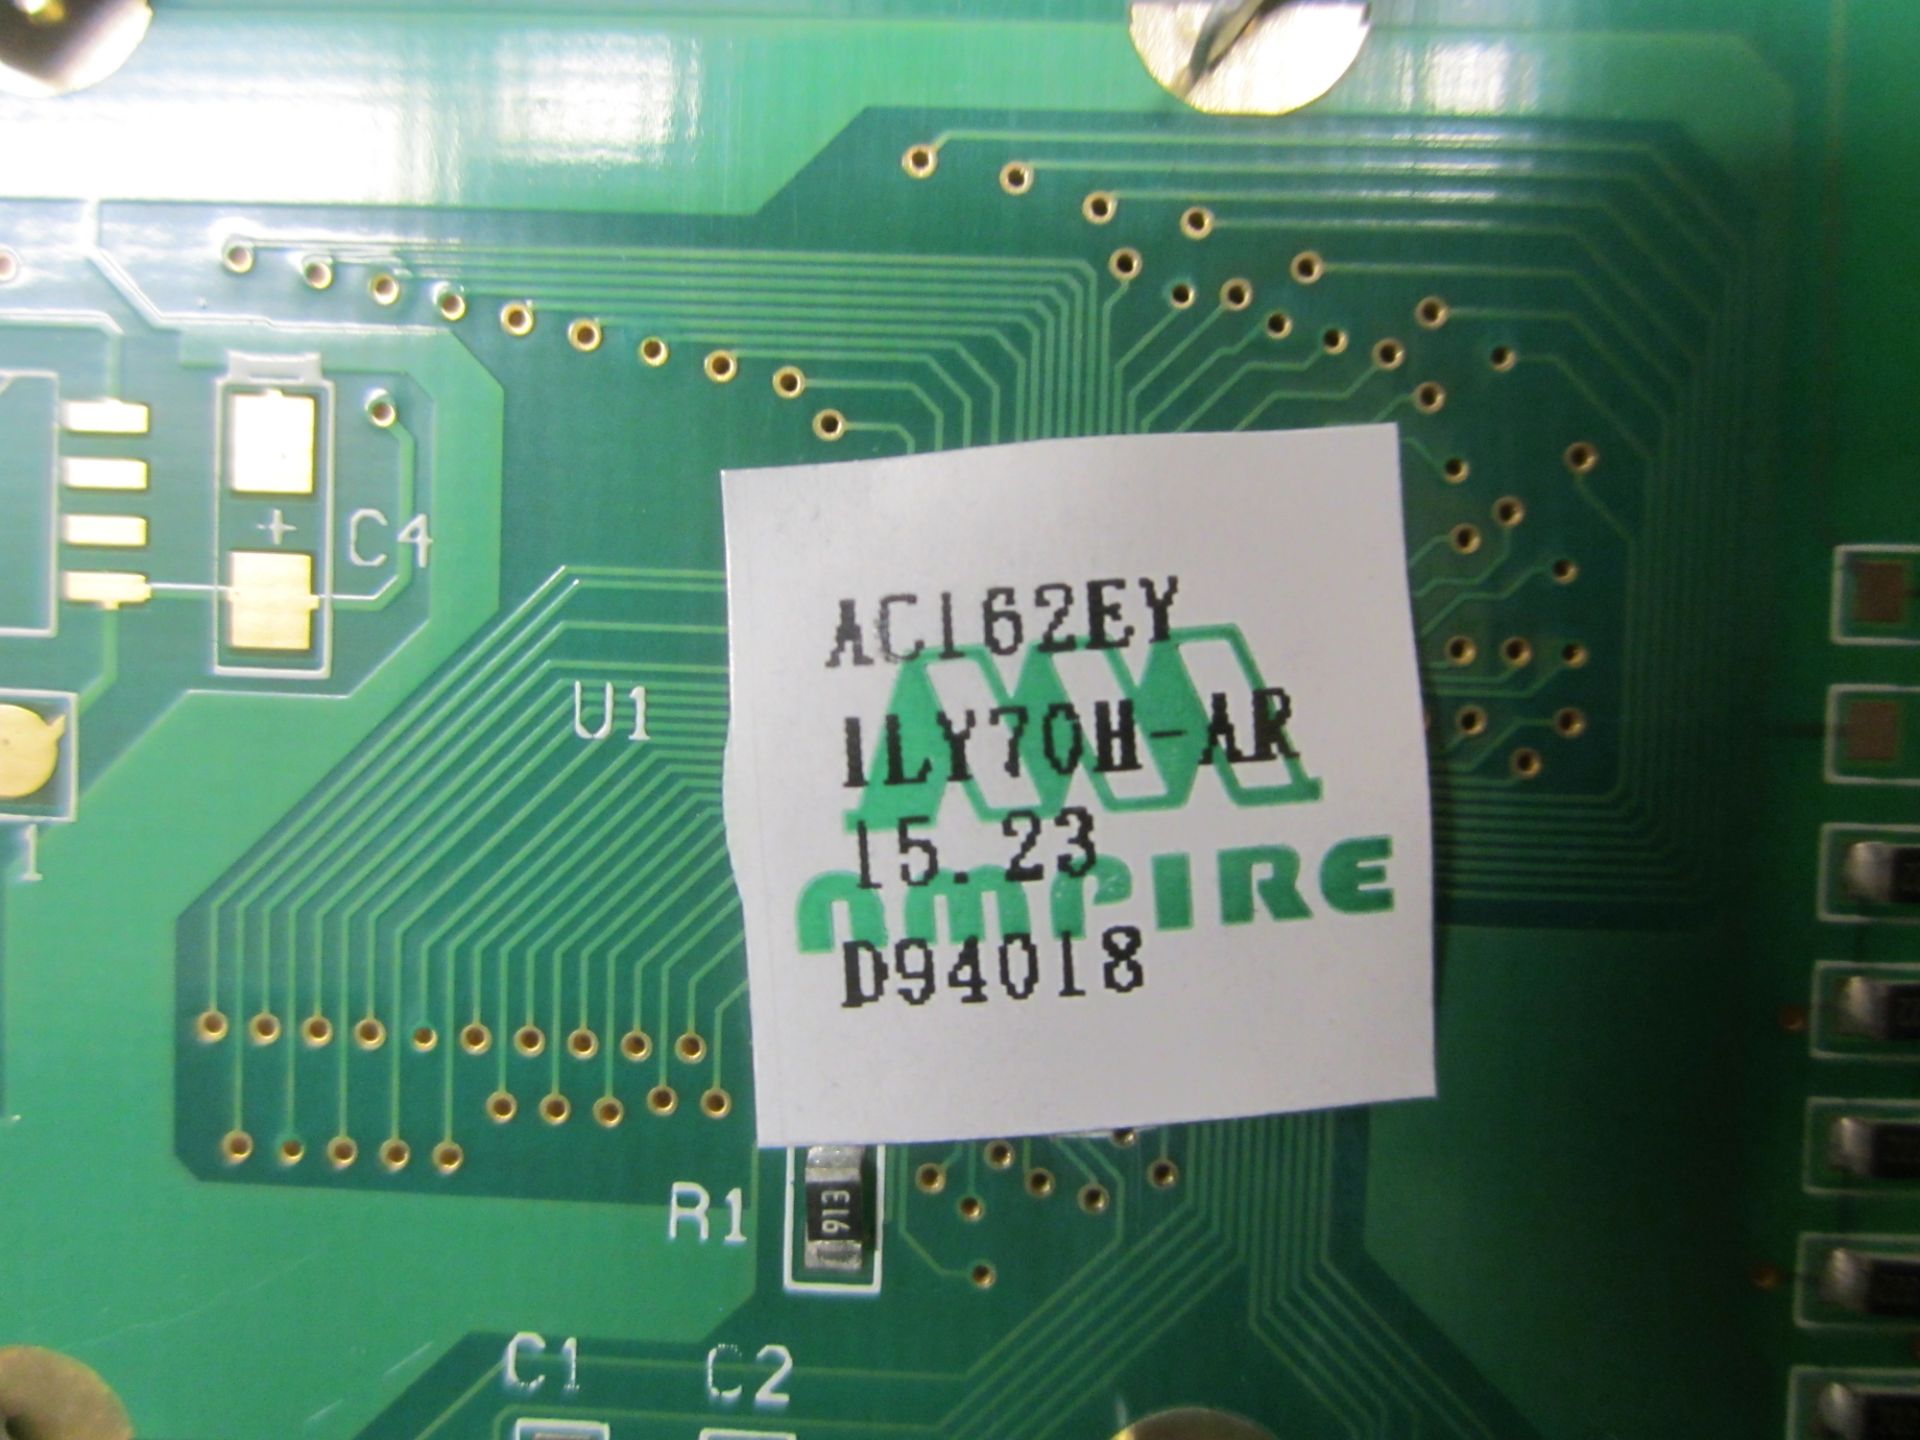 (40) Ampire AC162EY LCD Displays - Image 2 of 2